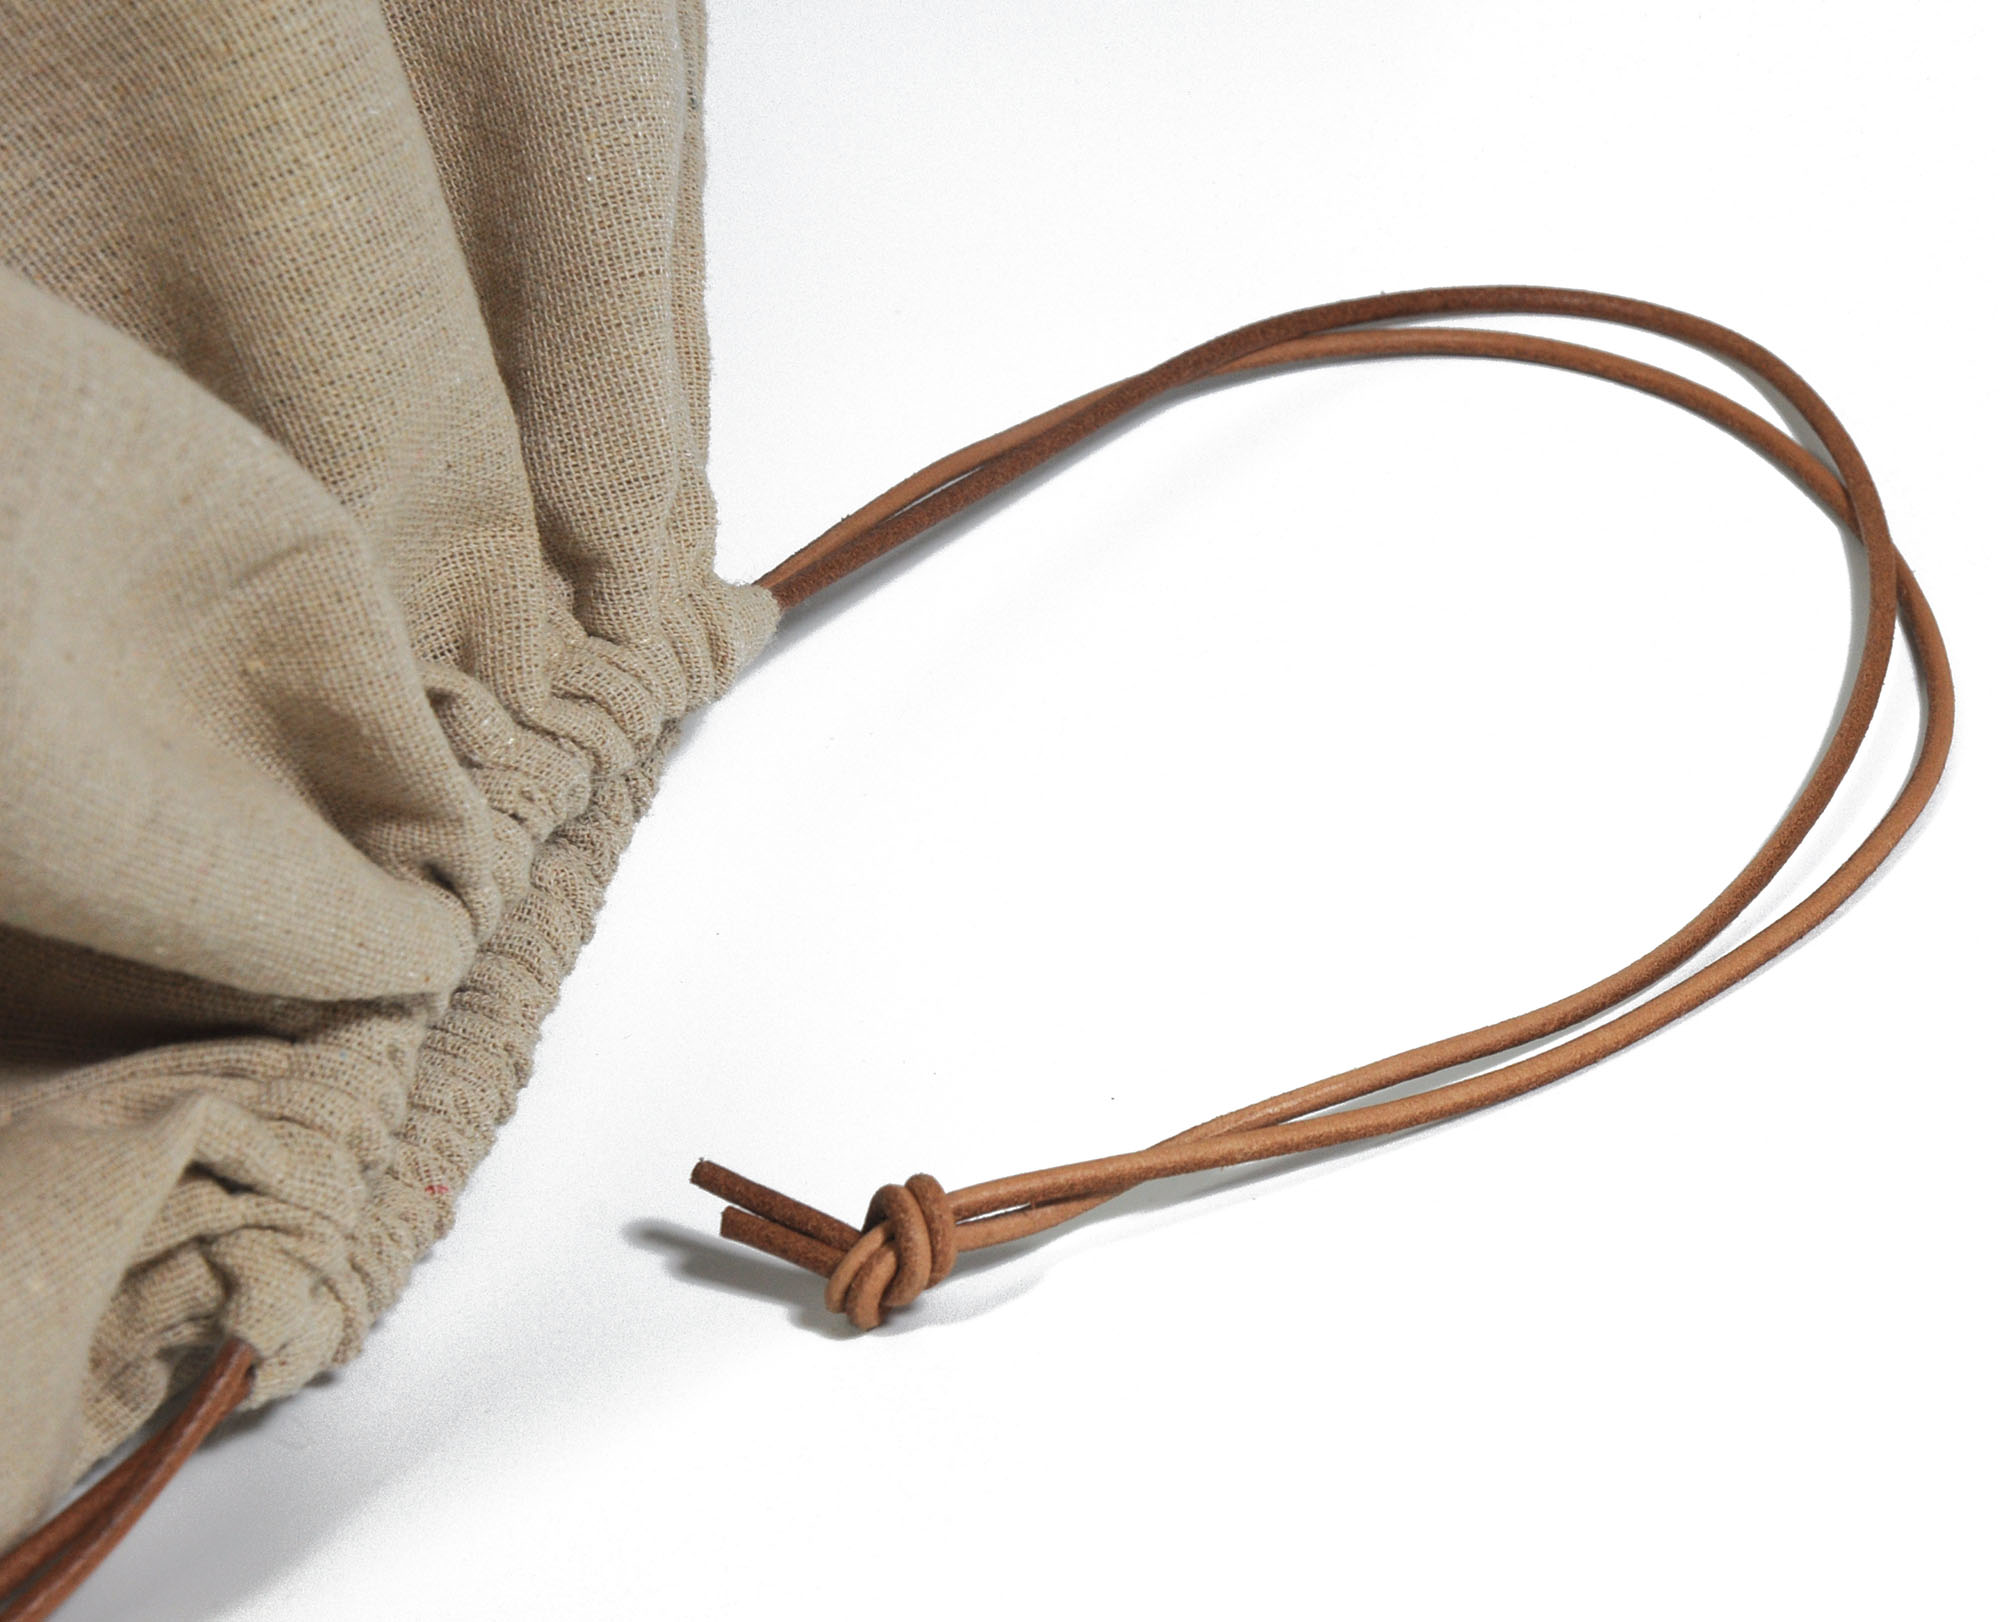 Genuine cowhide leather cord